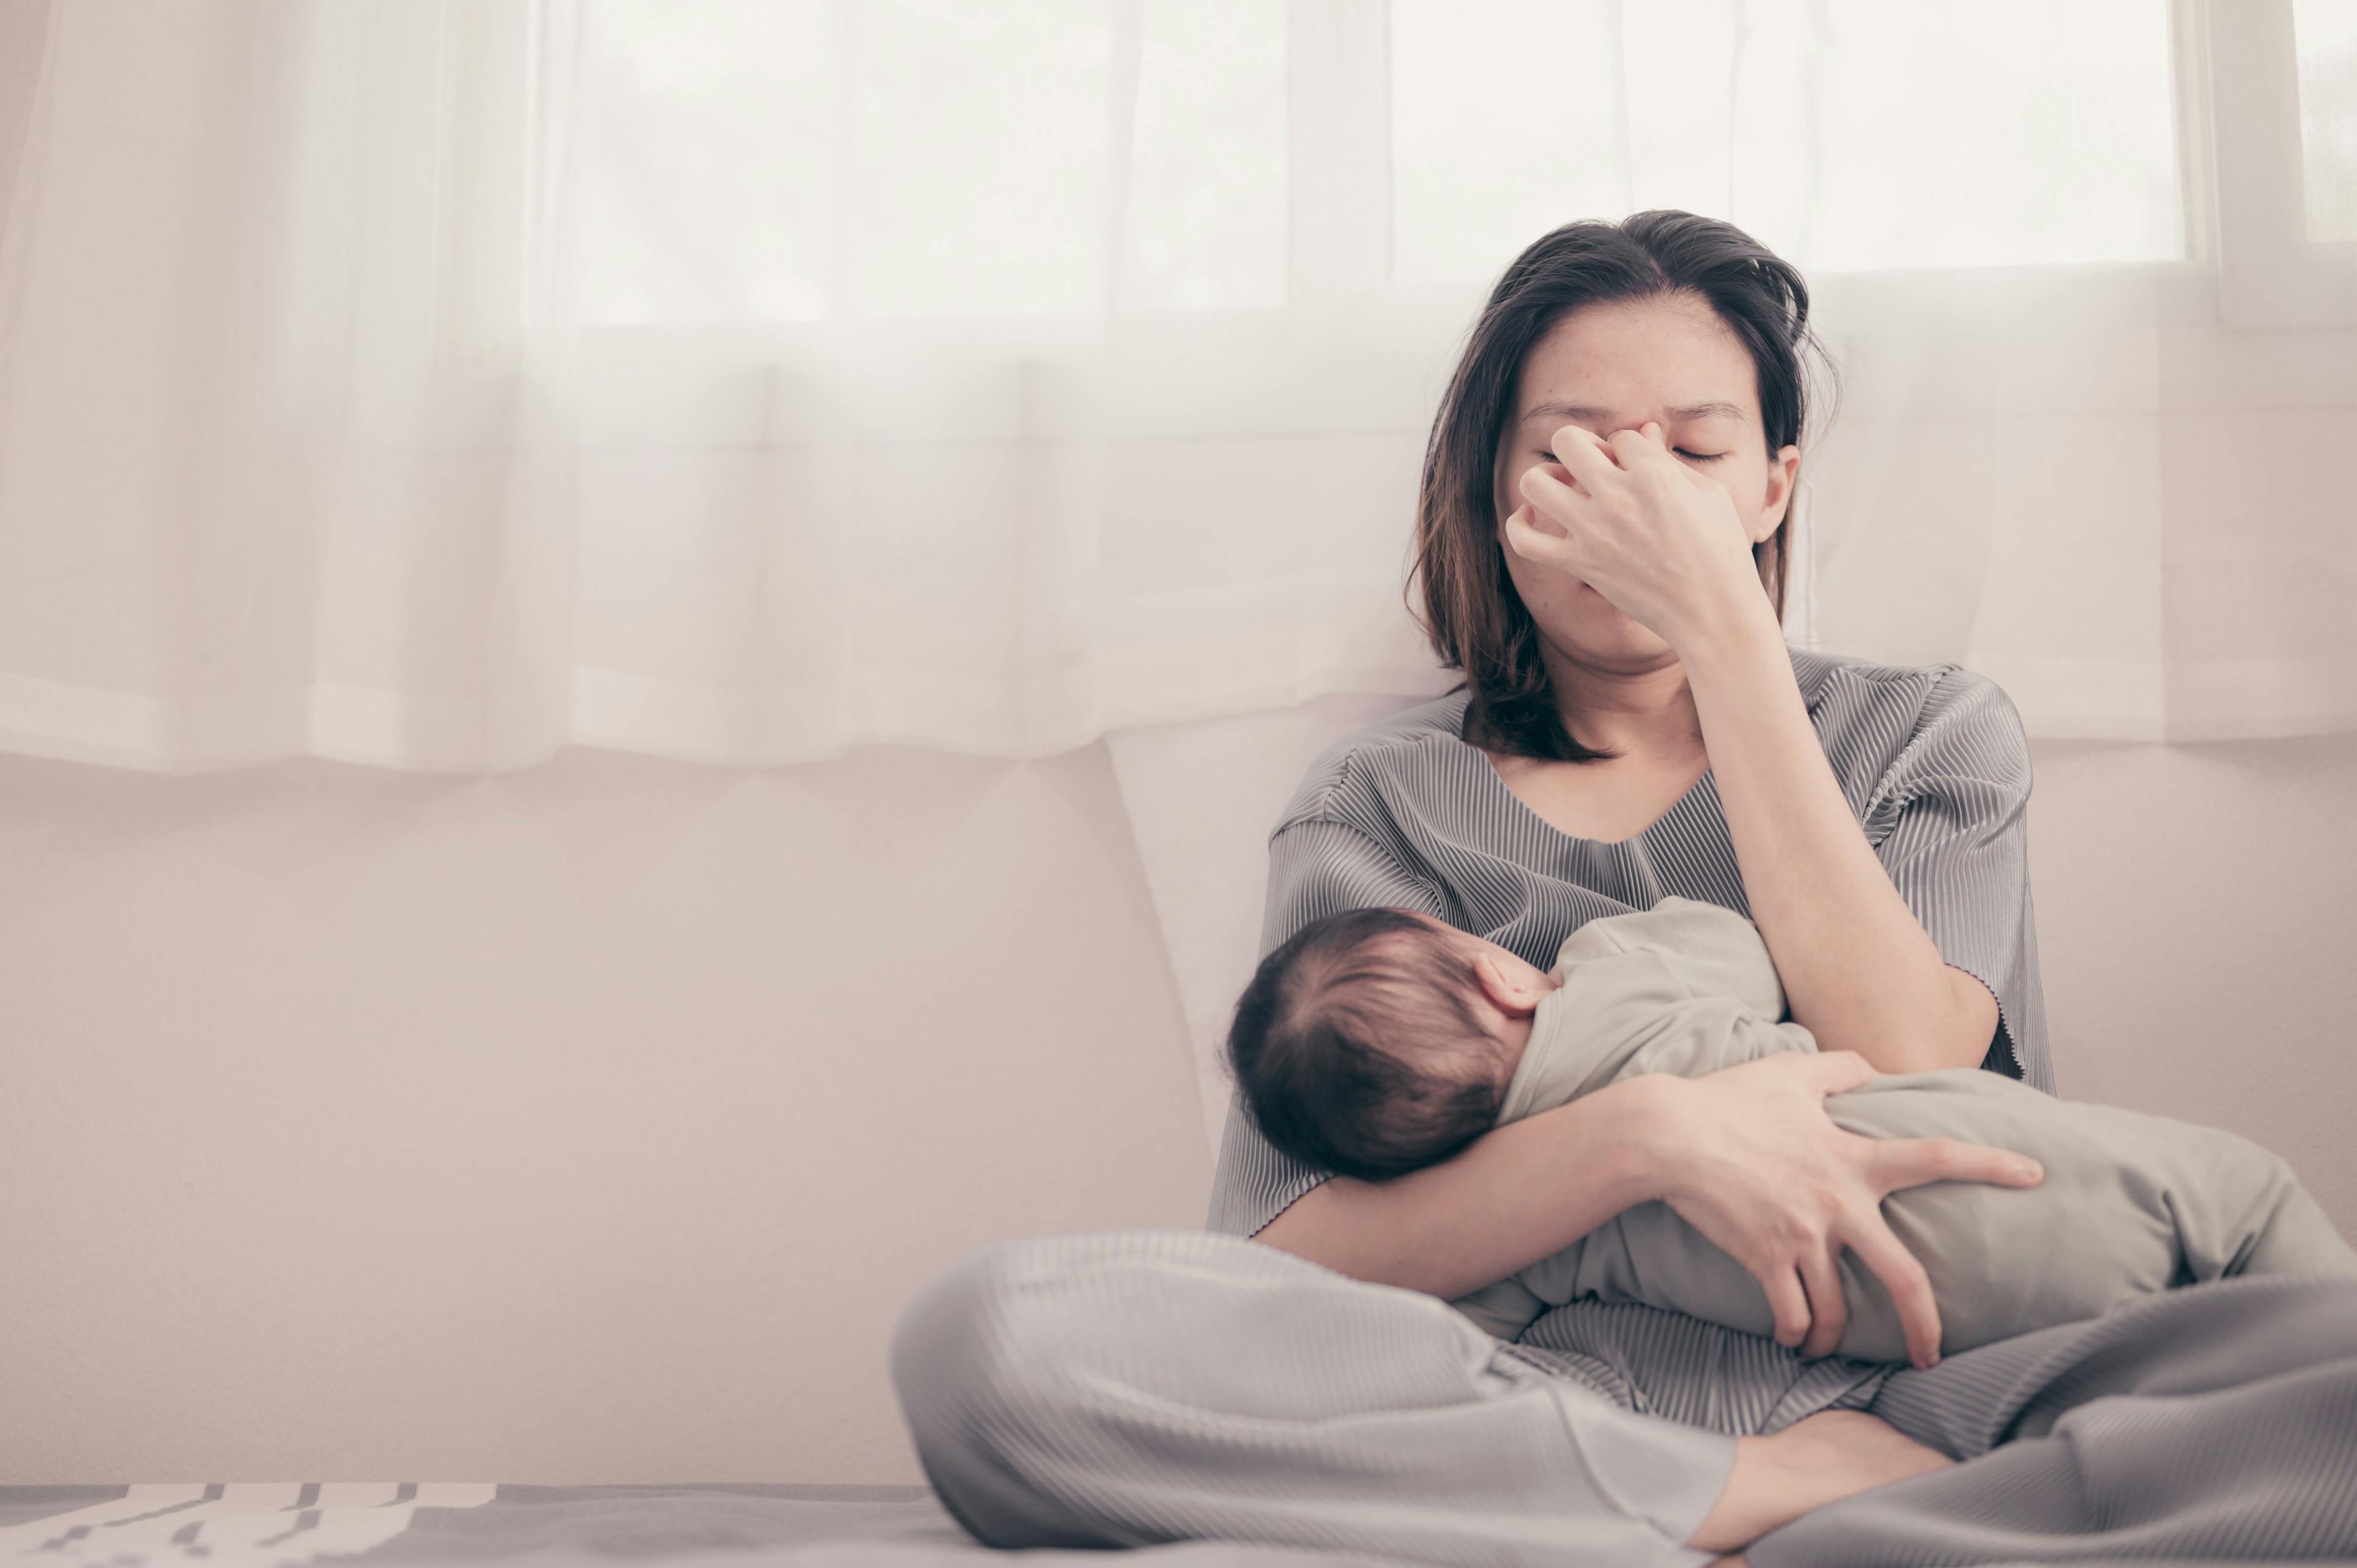 Zuranolone Approved as First, Only Oral Medication to Treat Postpartum Depression